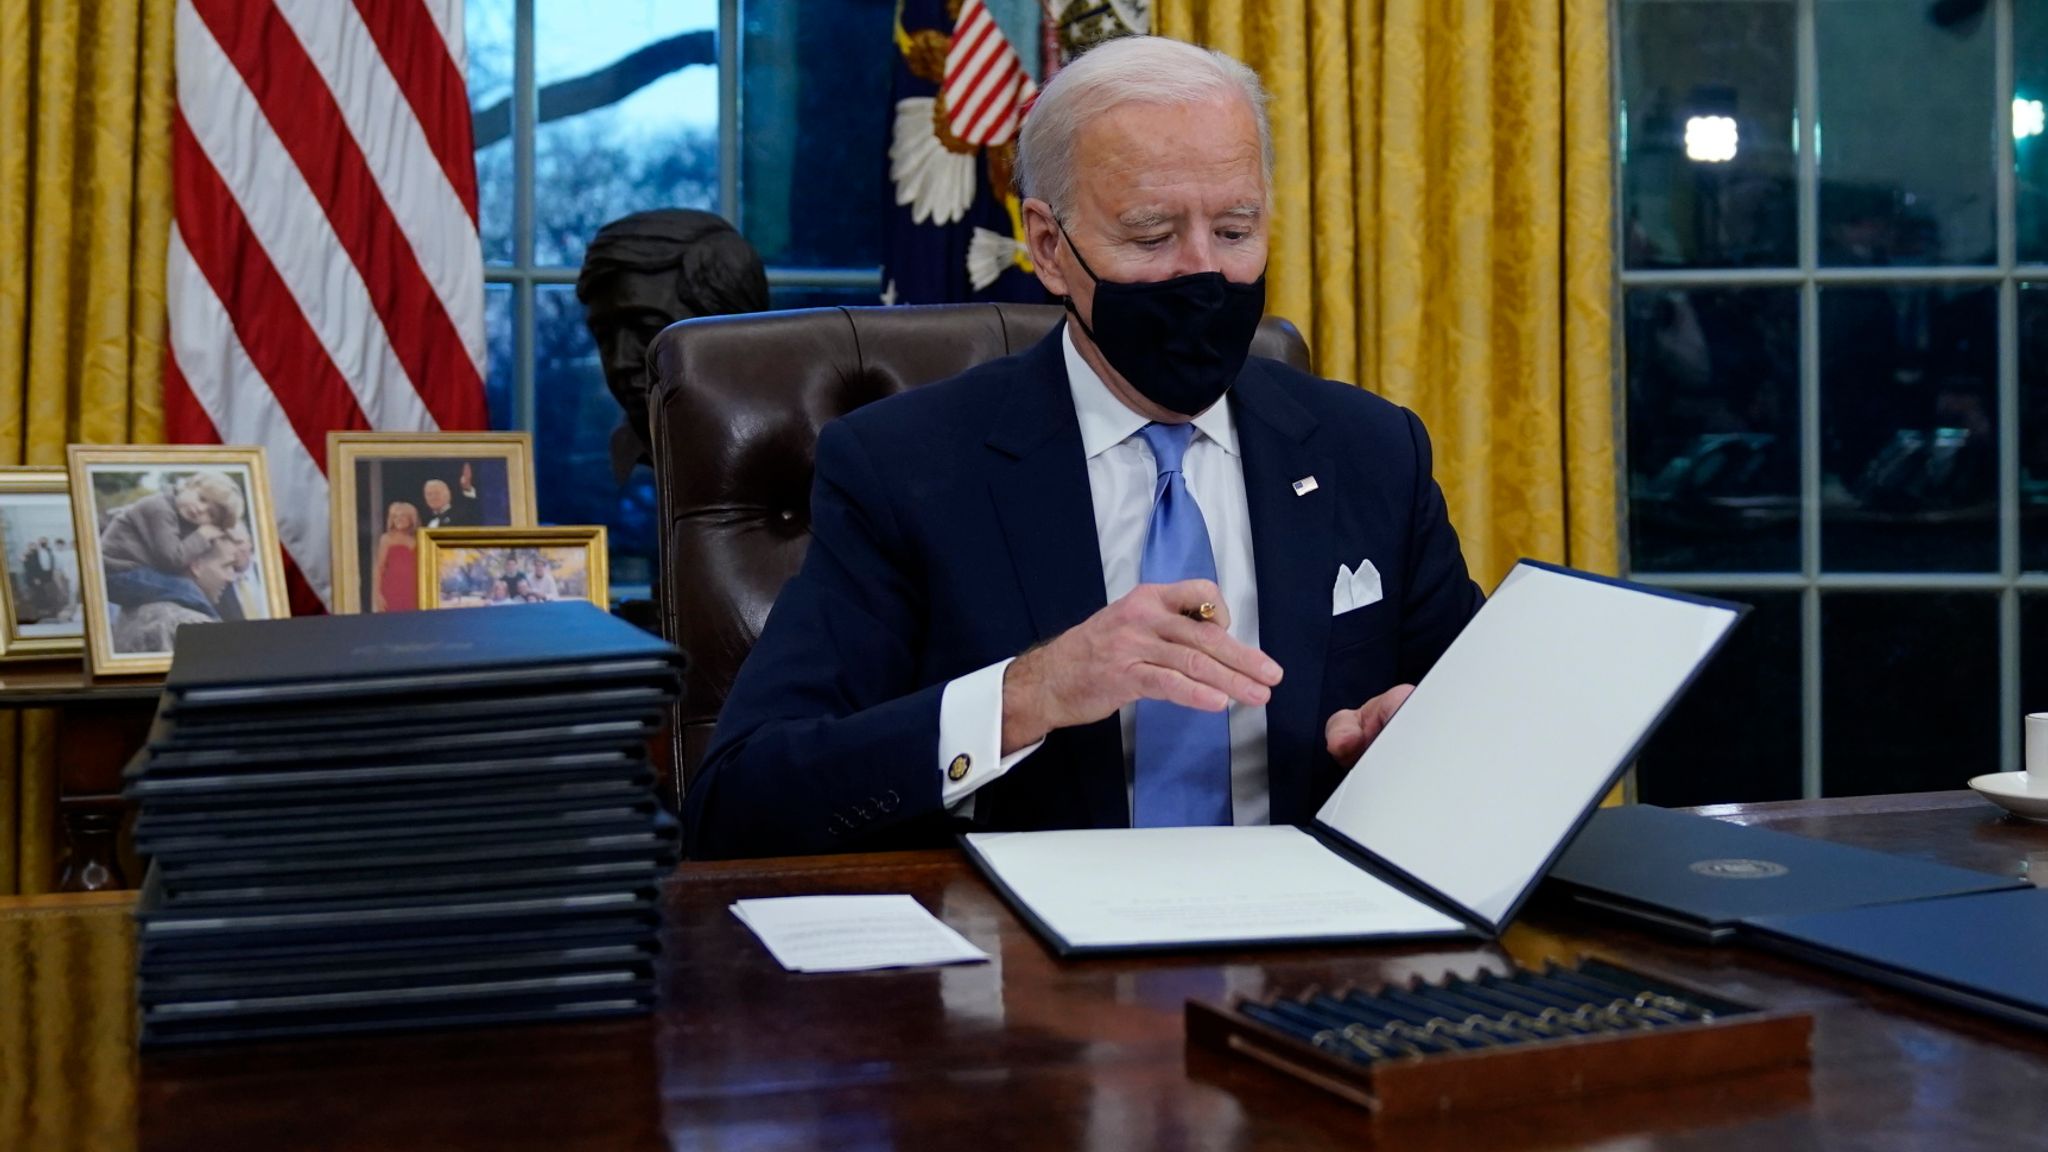 list of executive orders signed by biden so far